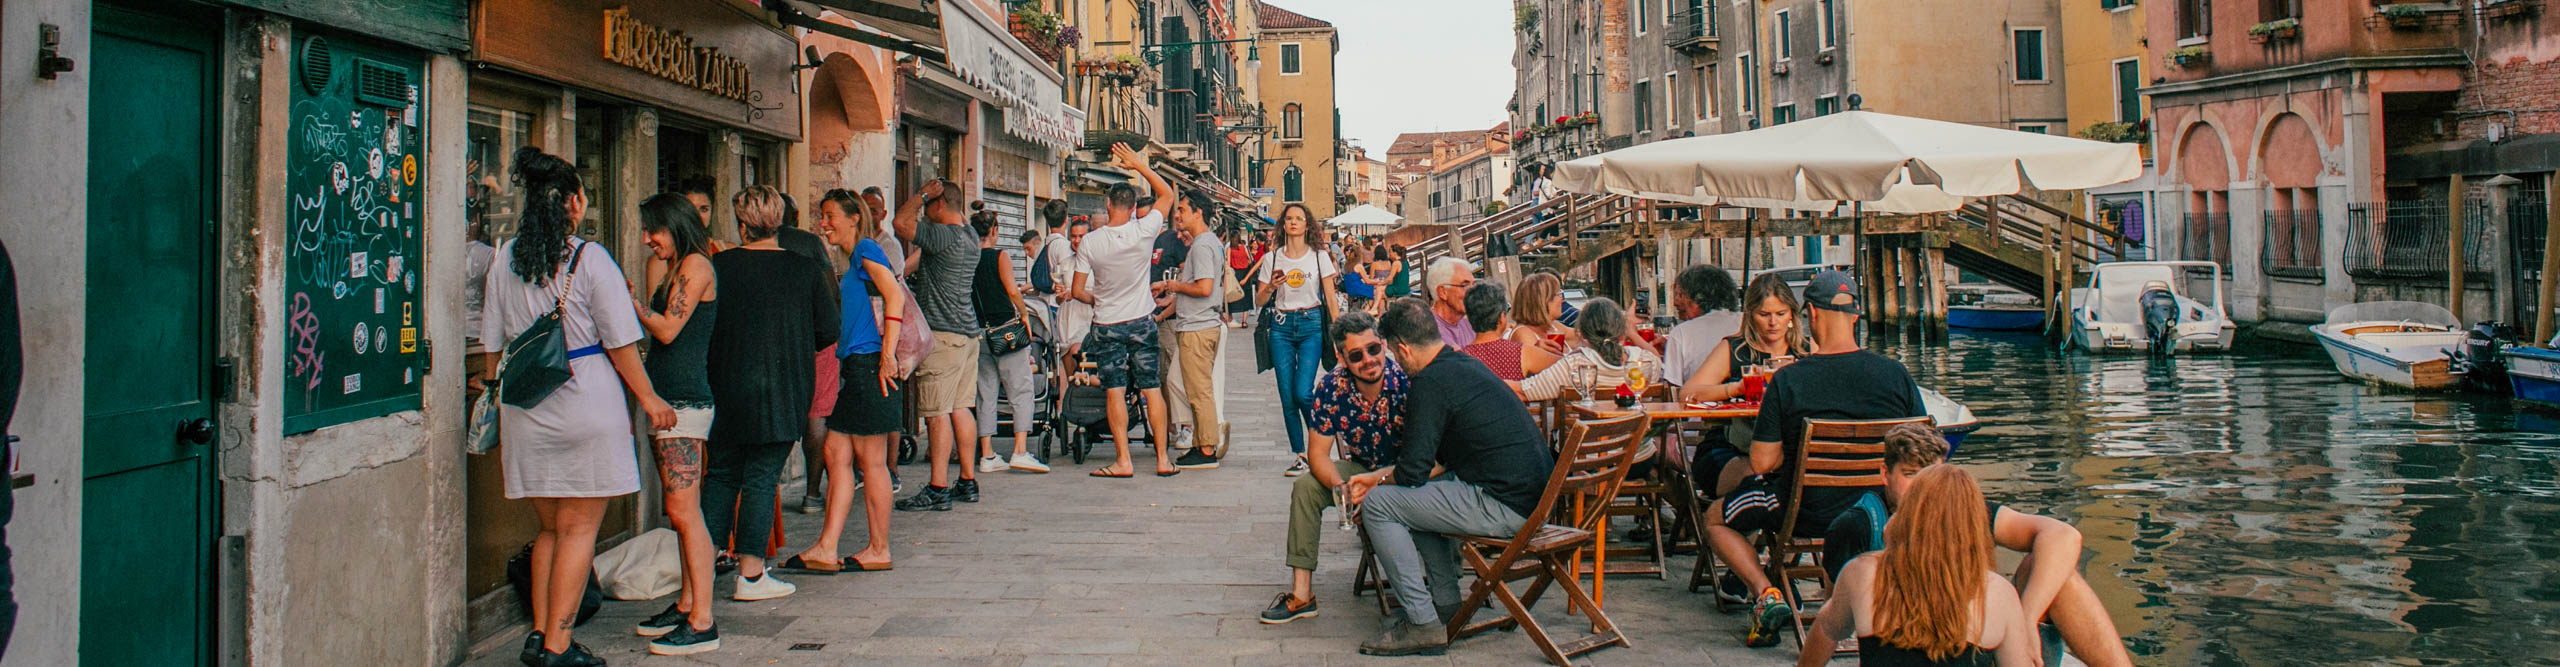 People drinking and eating in bars by the canal in Venice, Italy 